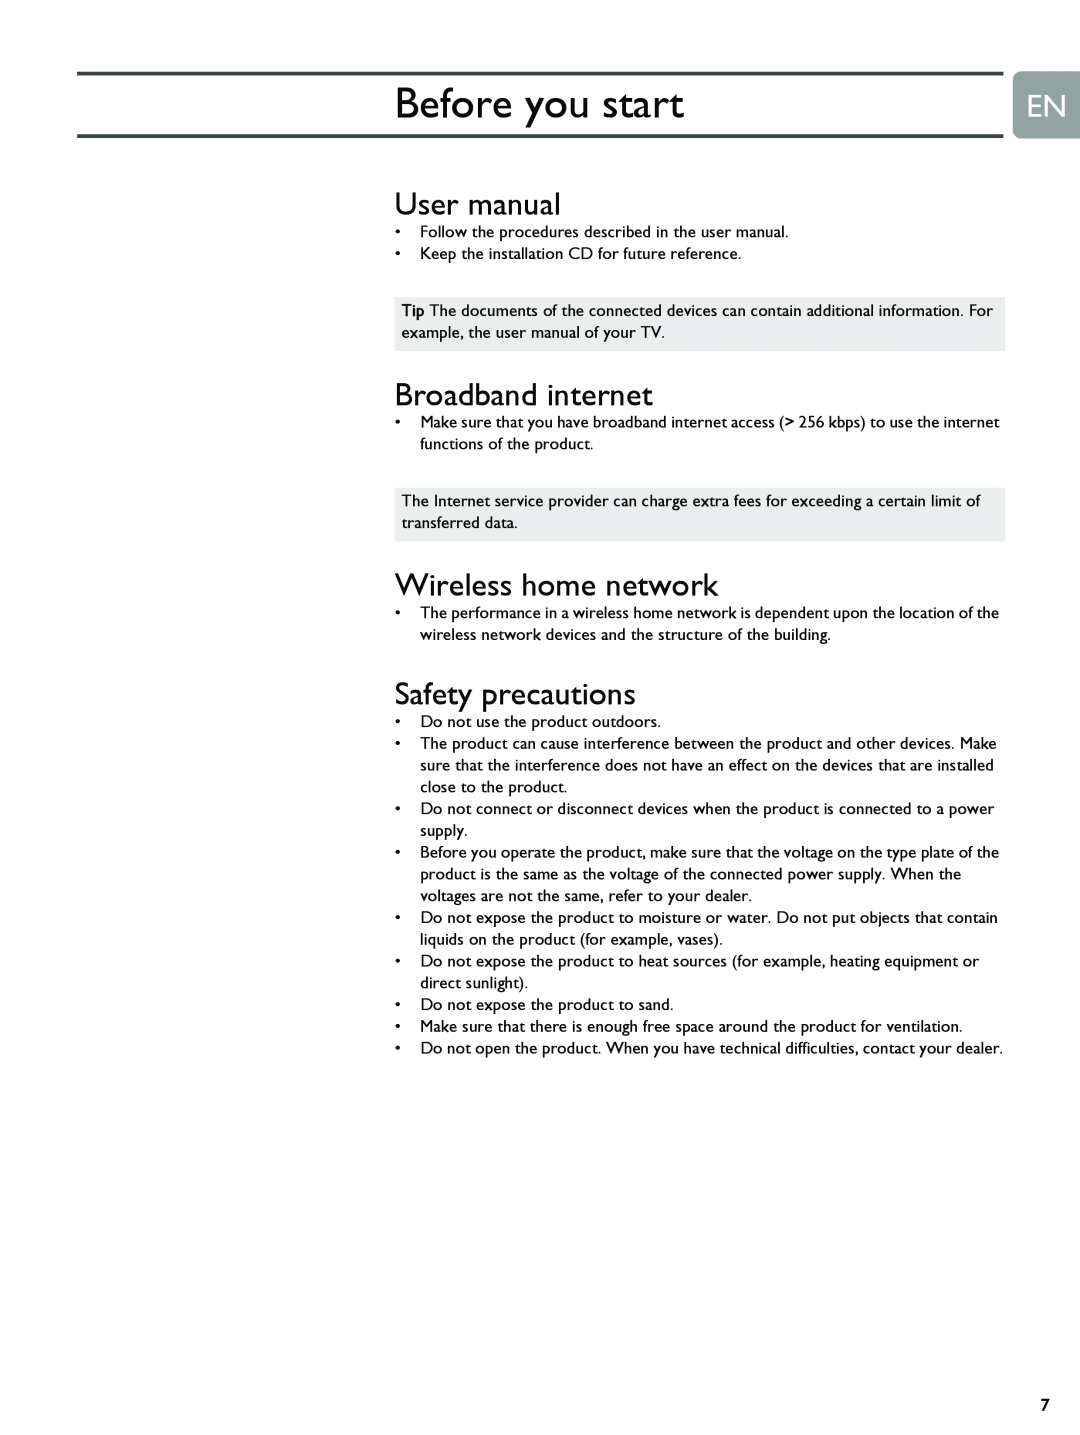 Philips SLM5500 user manual Before you start, User manual, Broadband internet, Wireless home network, Safety precautions 